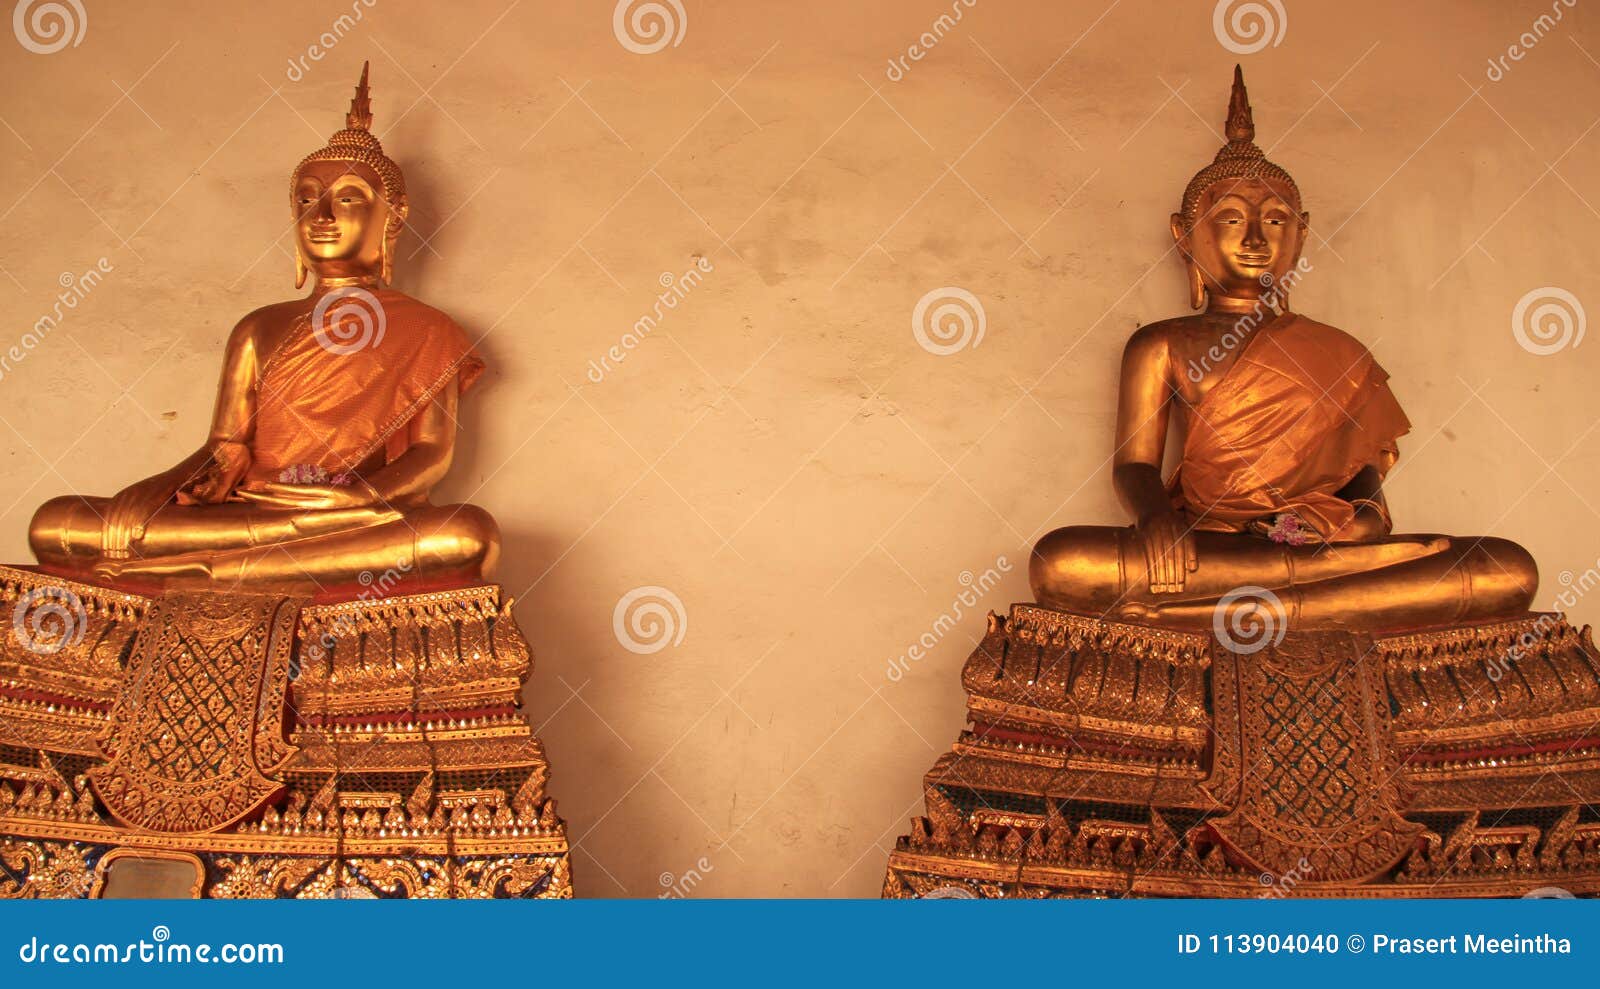 religion. golden buddhas image with mortar walls